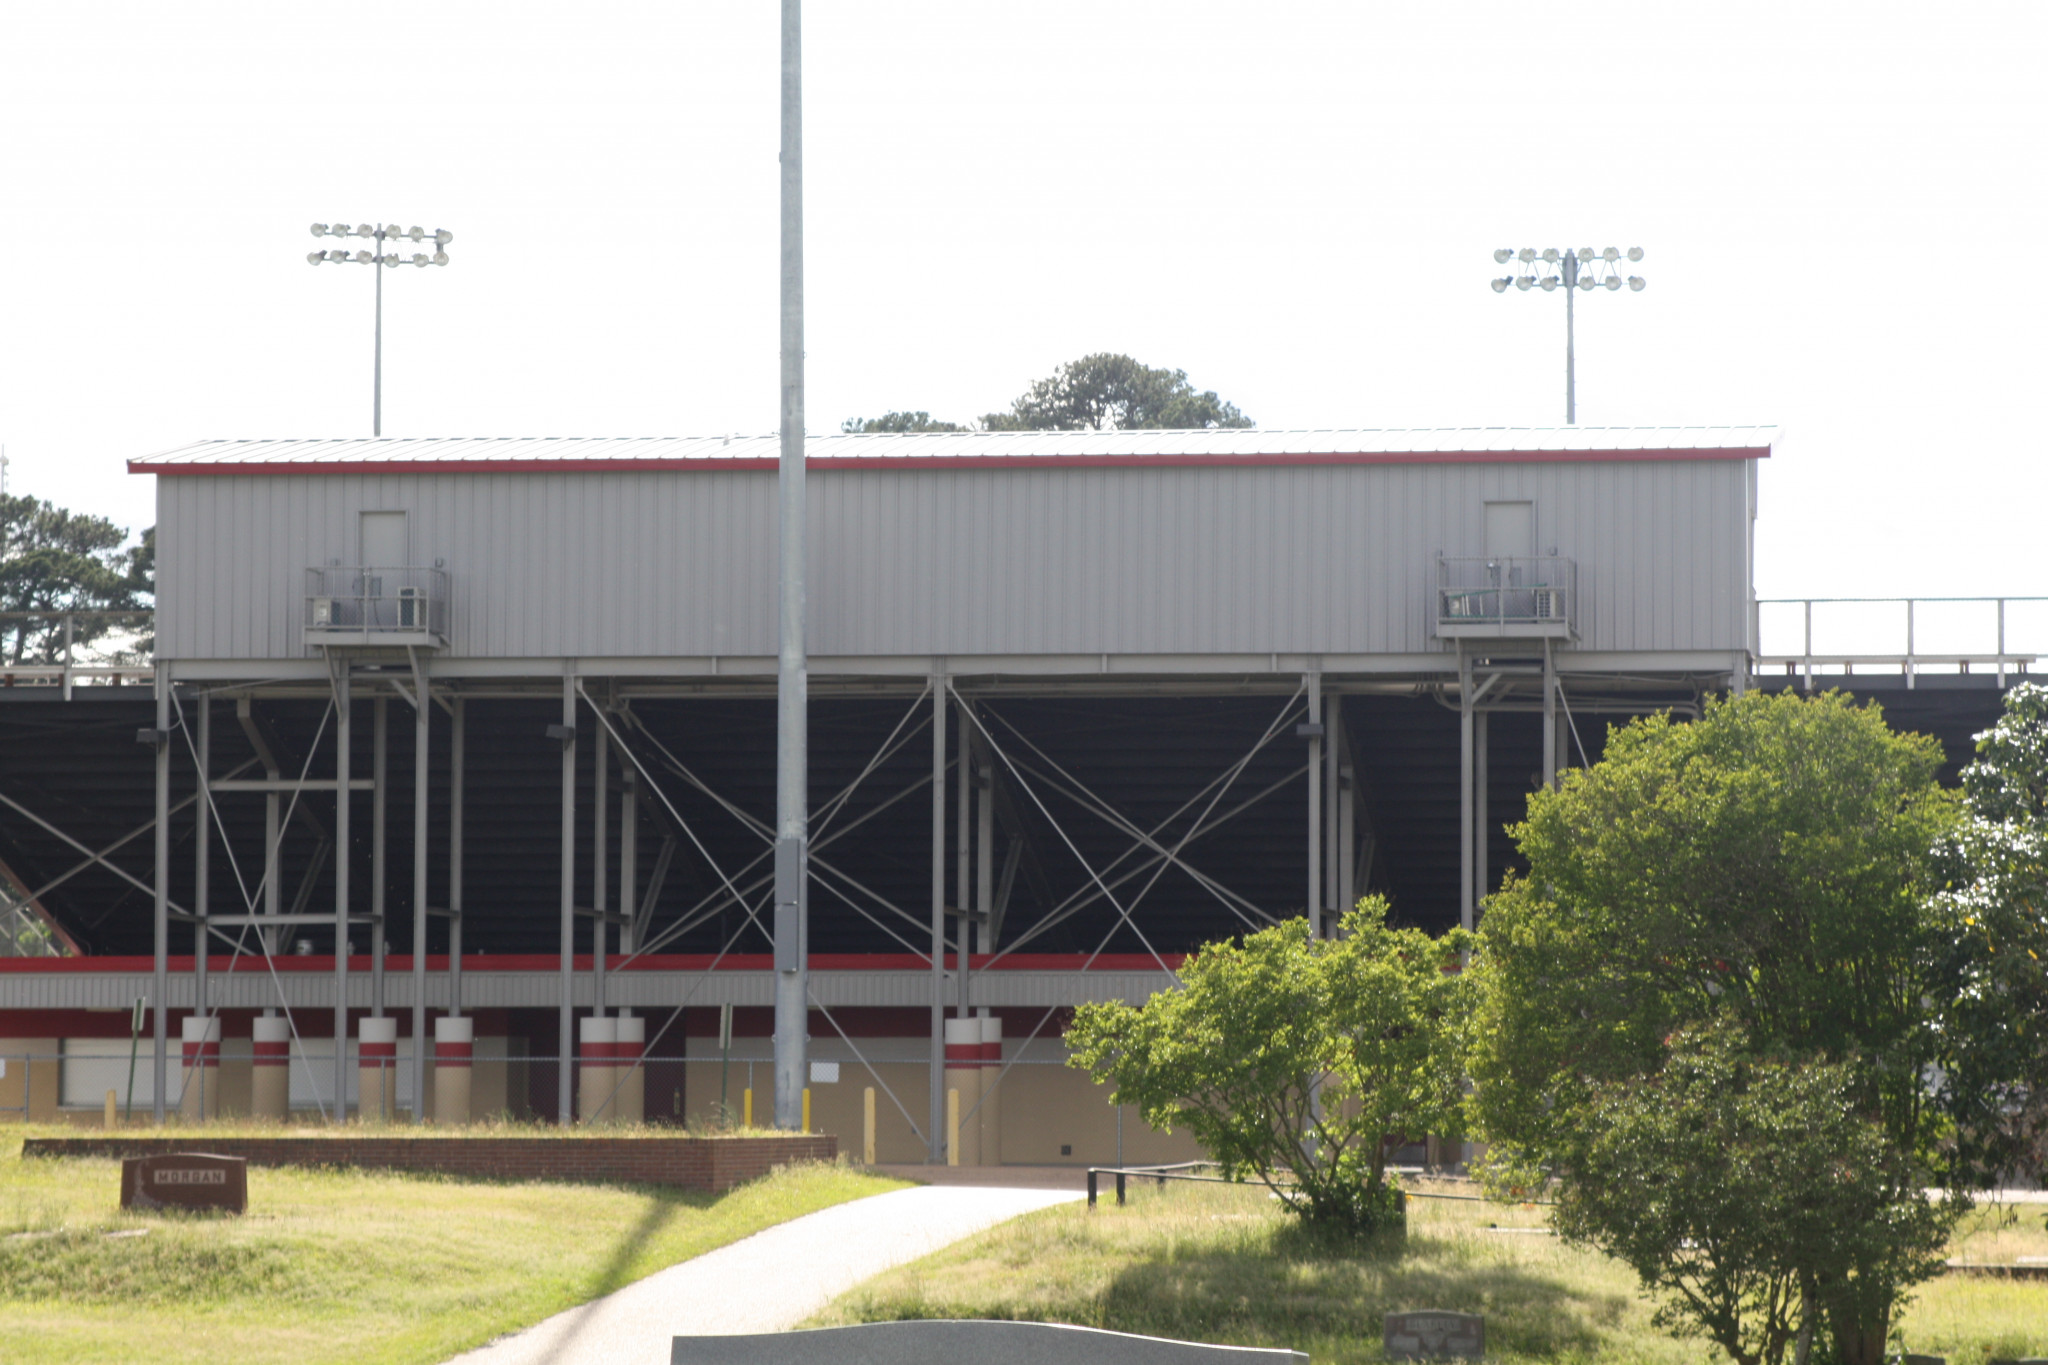 The stadium's new press box and light pole as they stand now.